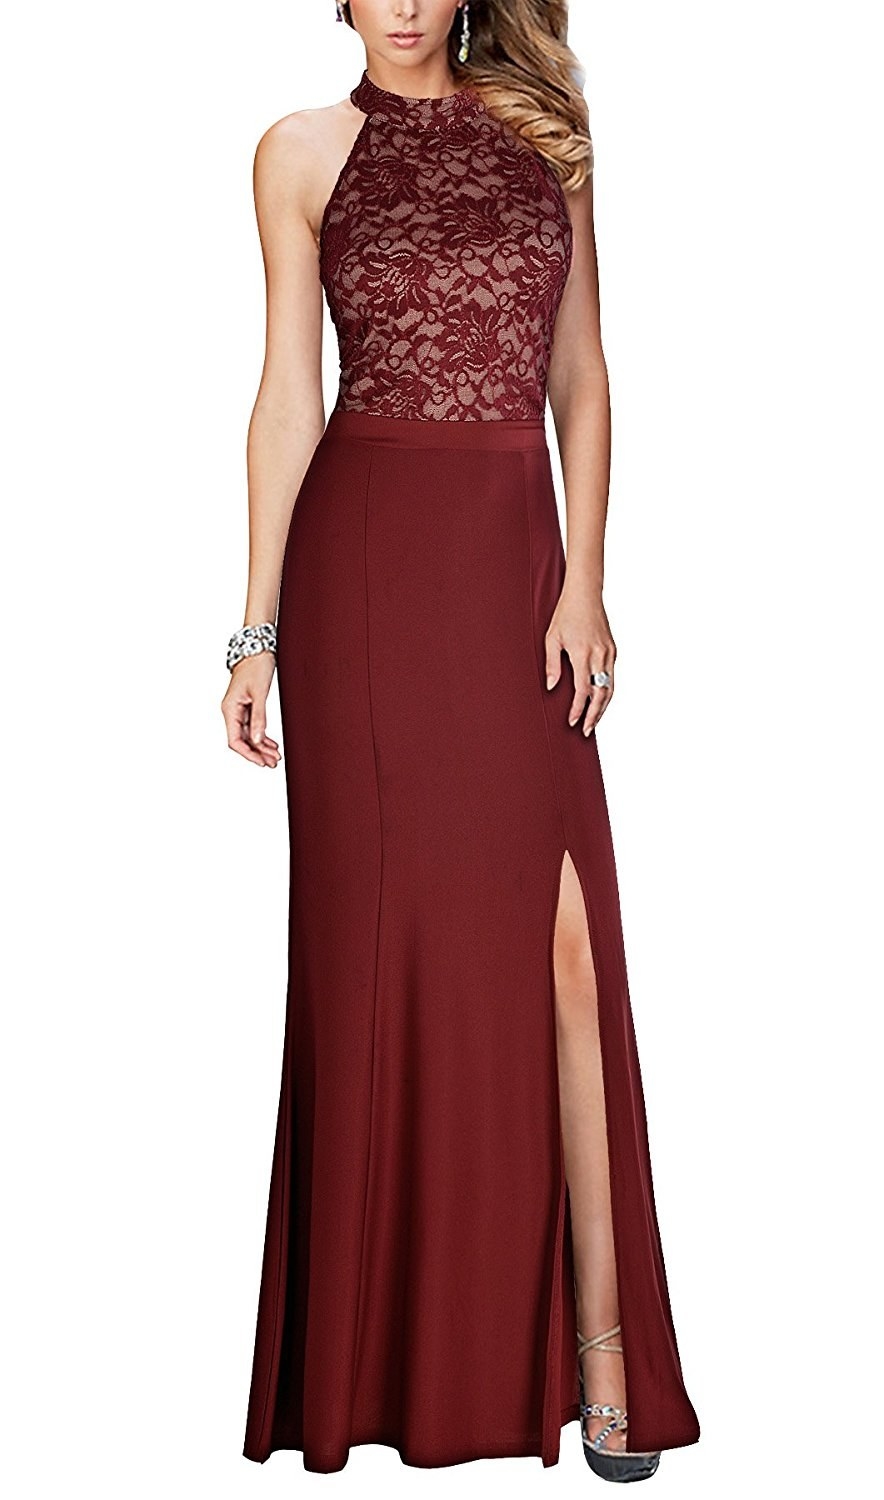 30 Of The Best Prom Dresses You Can Get On Amazon